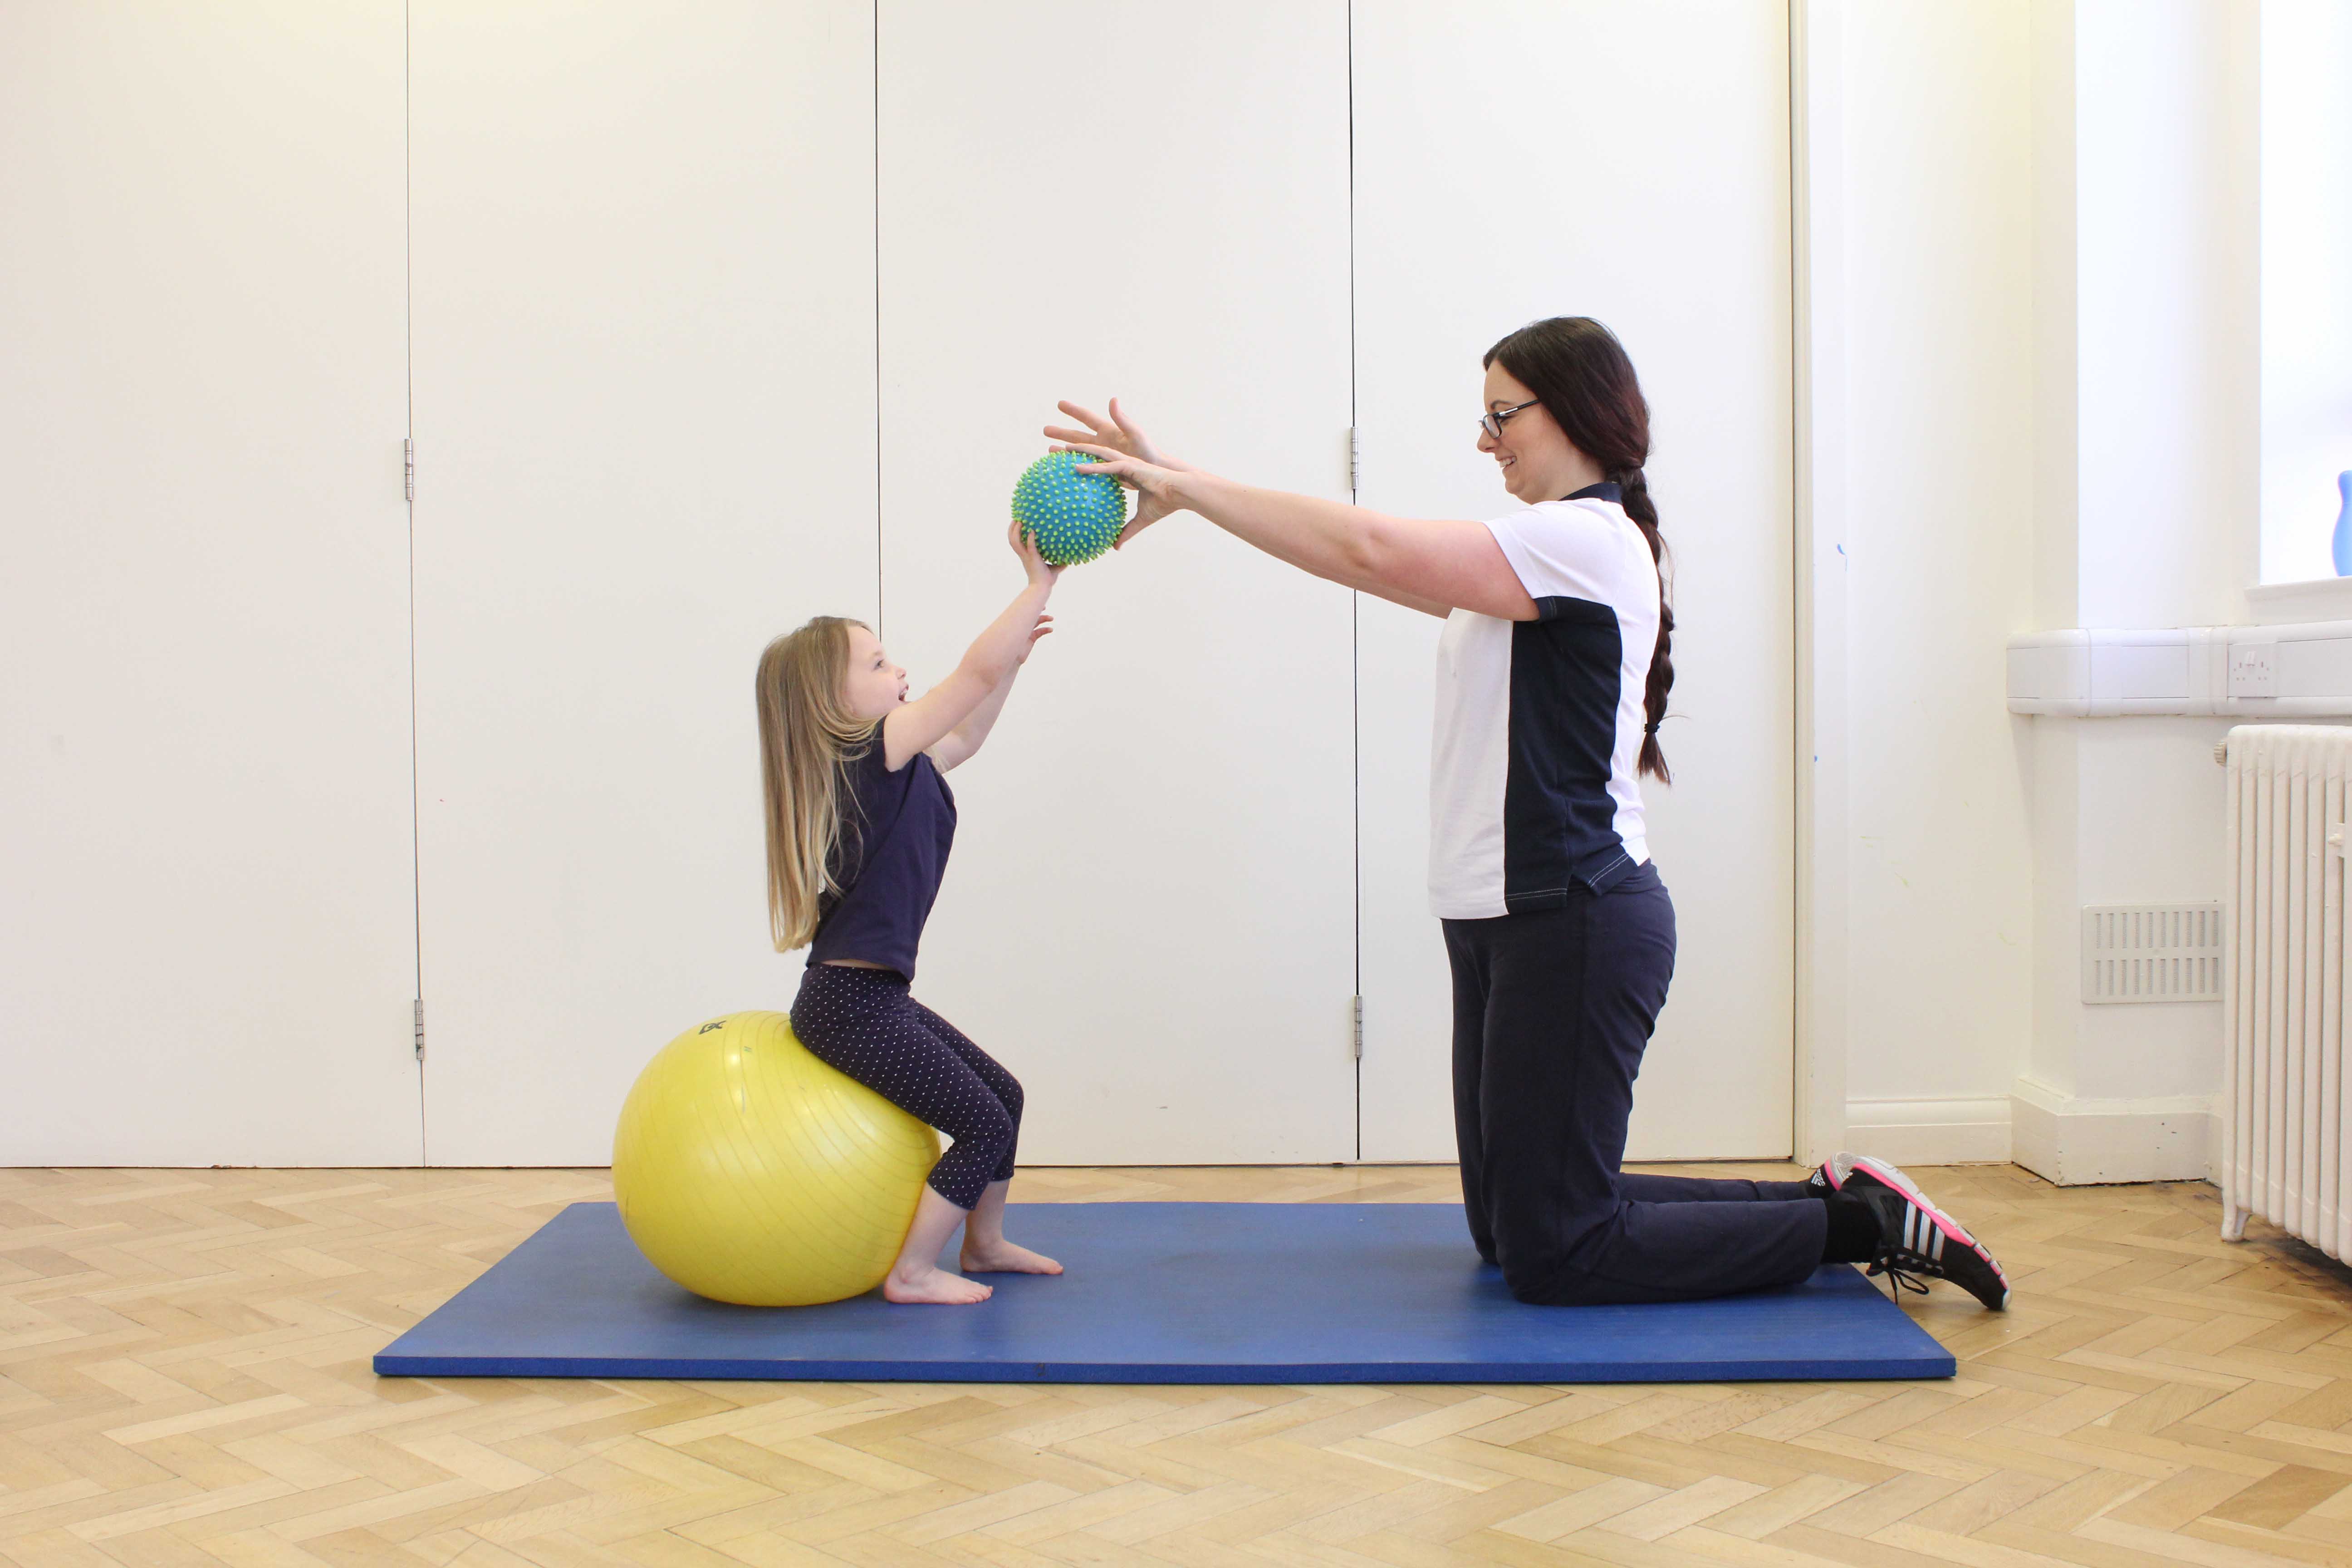 Toning and strengthening exercises supervised by an experienced physiotherapist